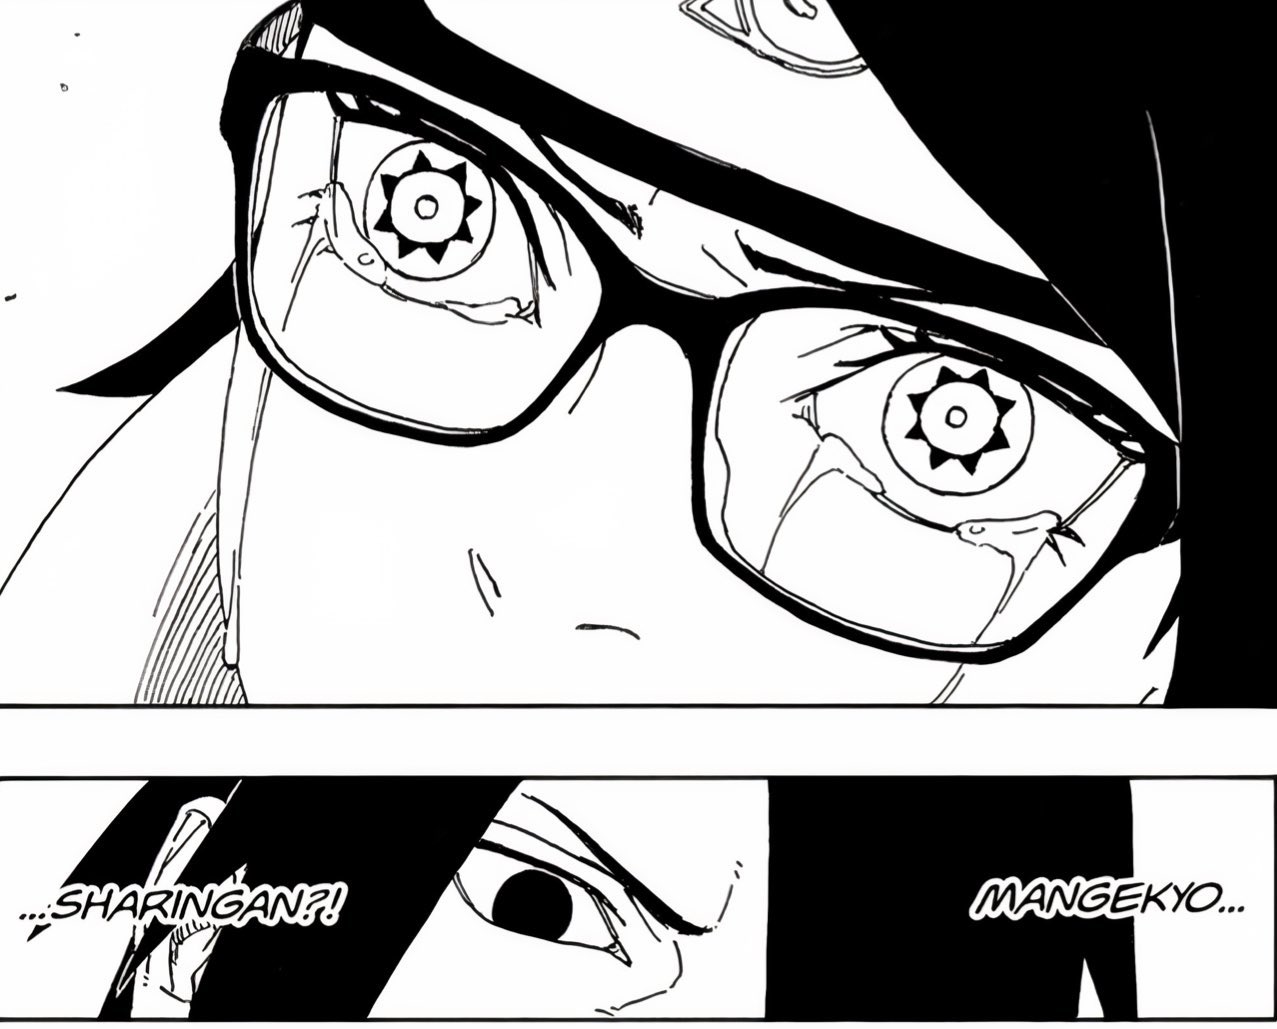 ludwig🌱 on X: When Sarada Uchiha gets her Mangekyo Sharingan hax and  another fight in the manga, it's over for this fandom.   / X